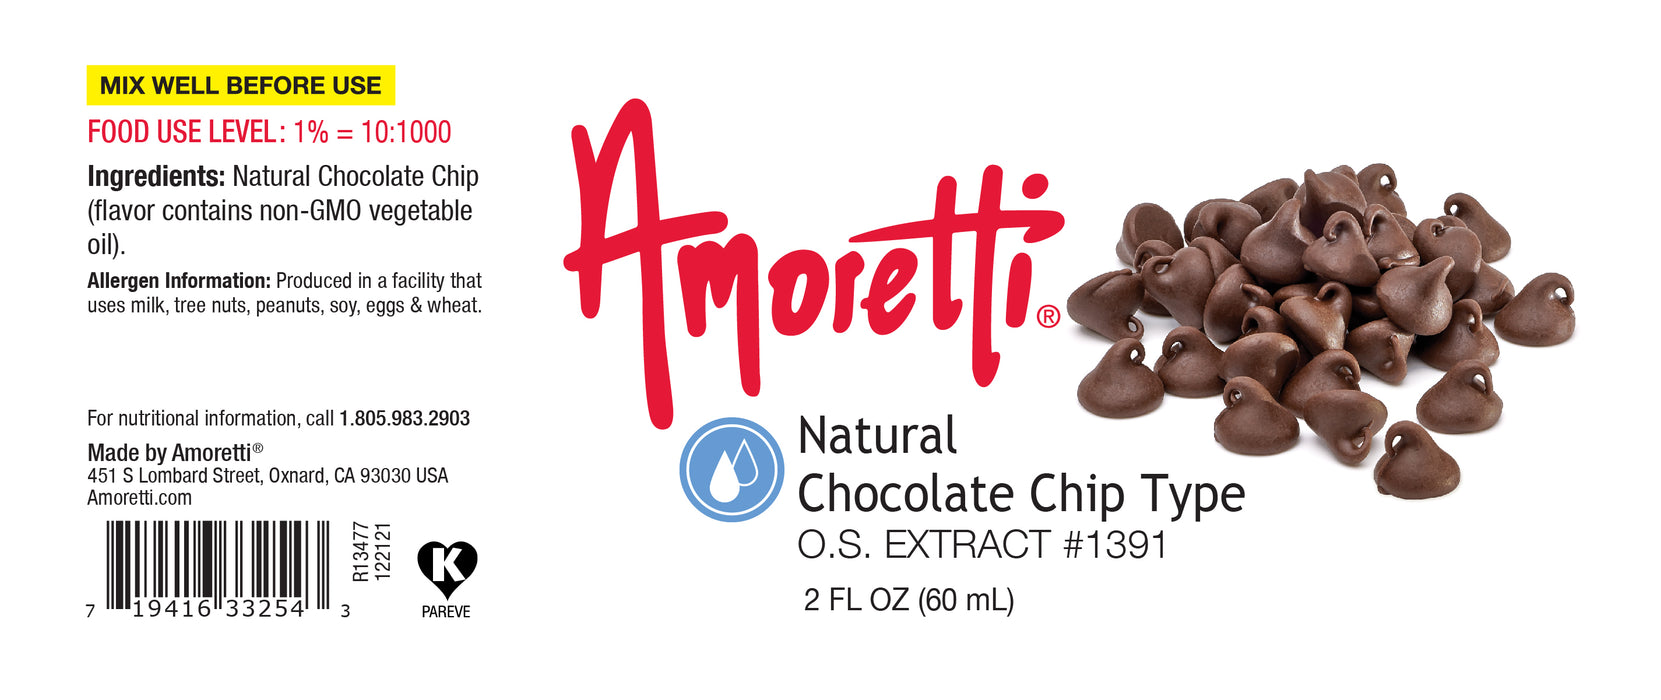 Natural Chocolate Chip Type Extract Oil Soluble